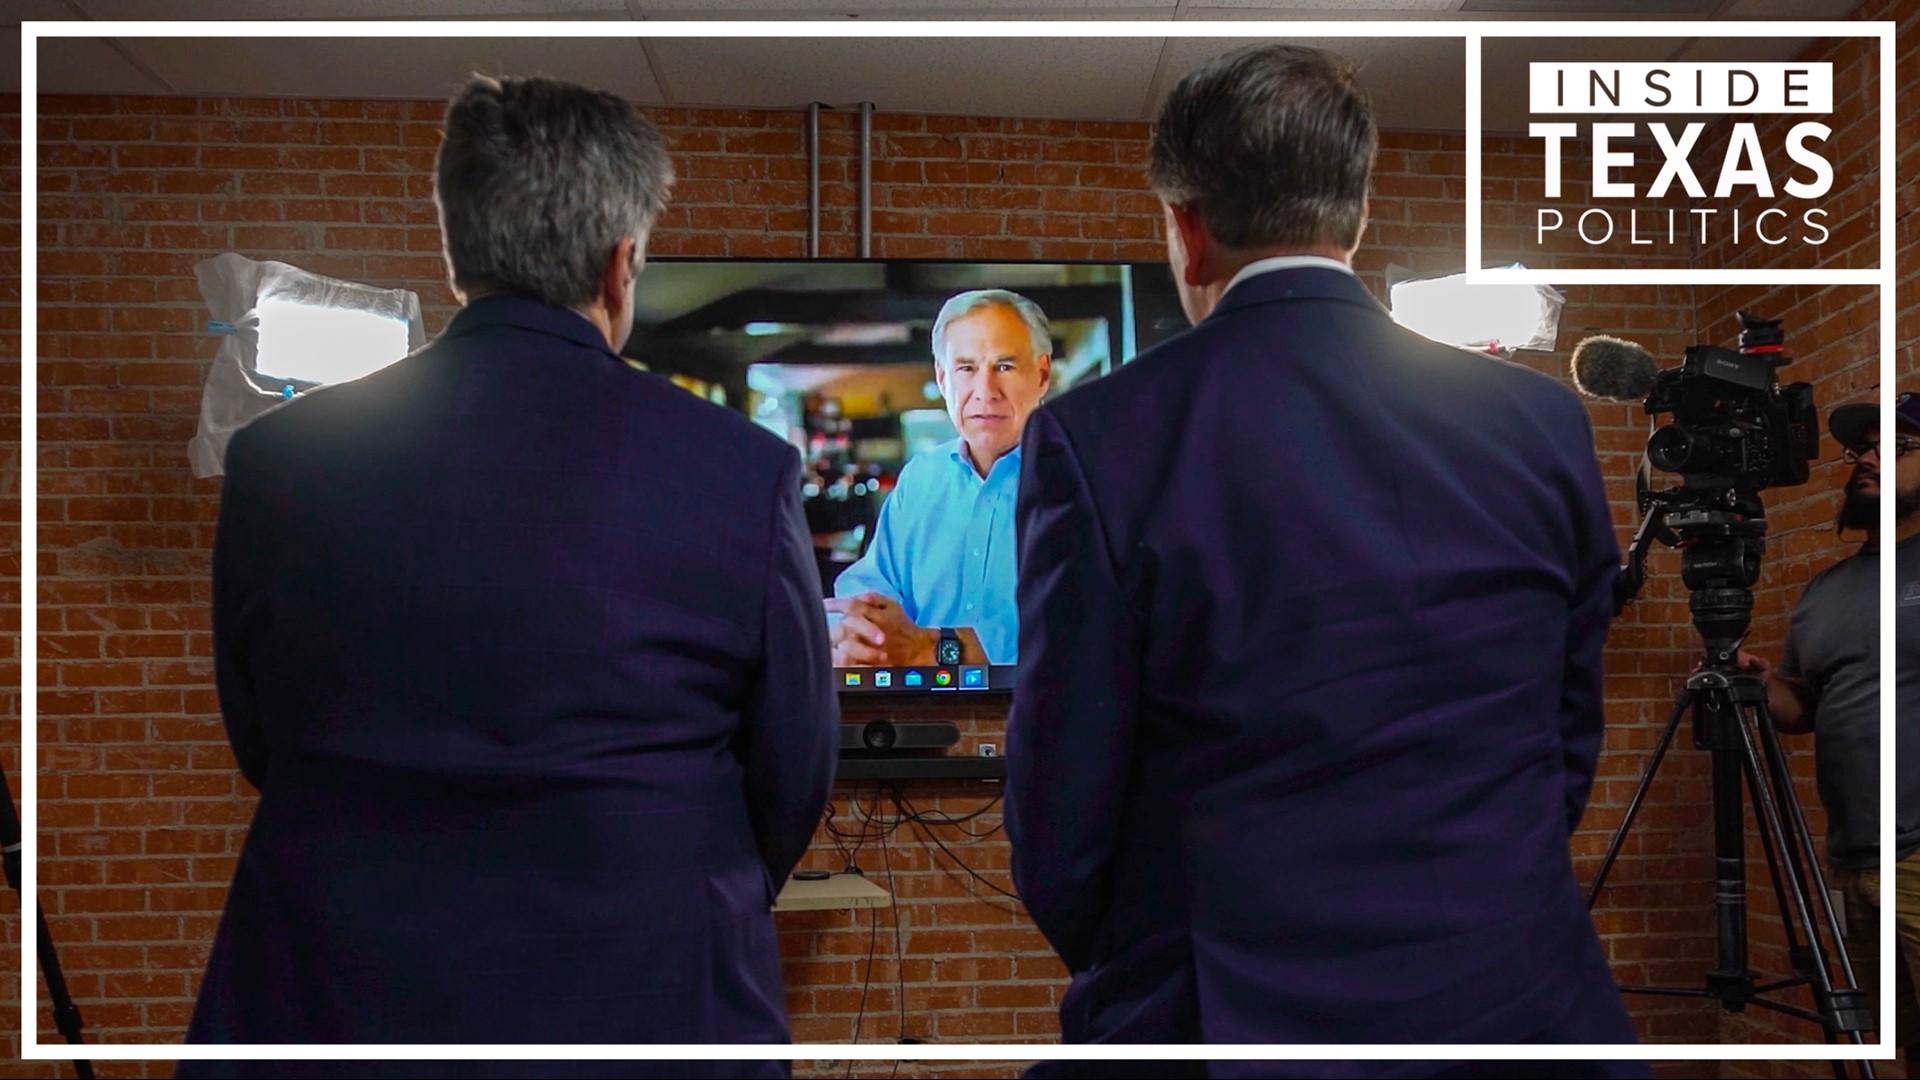 Veteran ad producer Vinny Minchillo gives his perspective on TV ads released for Gov. Greg Abbott and challenger Beto O'Rourke's campaigns.